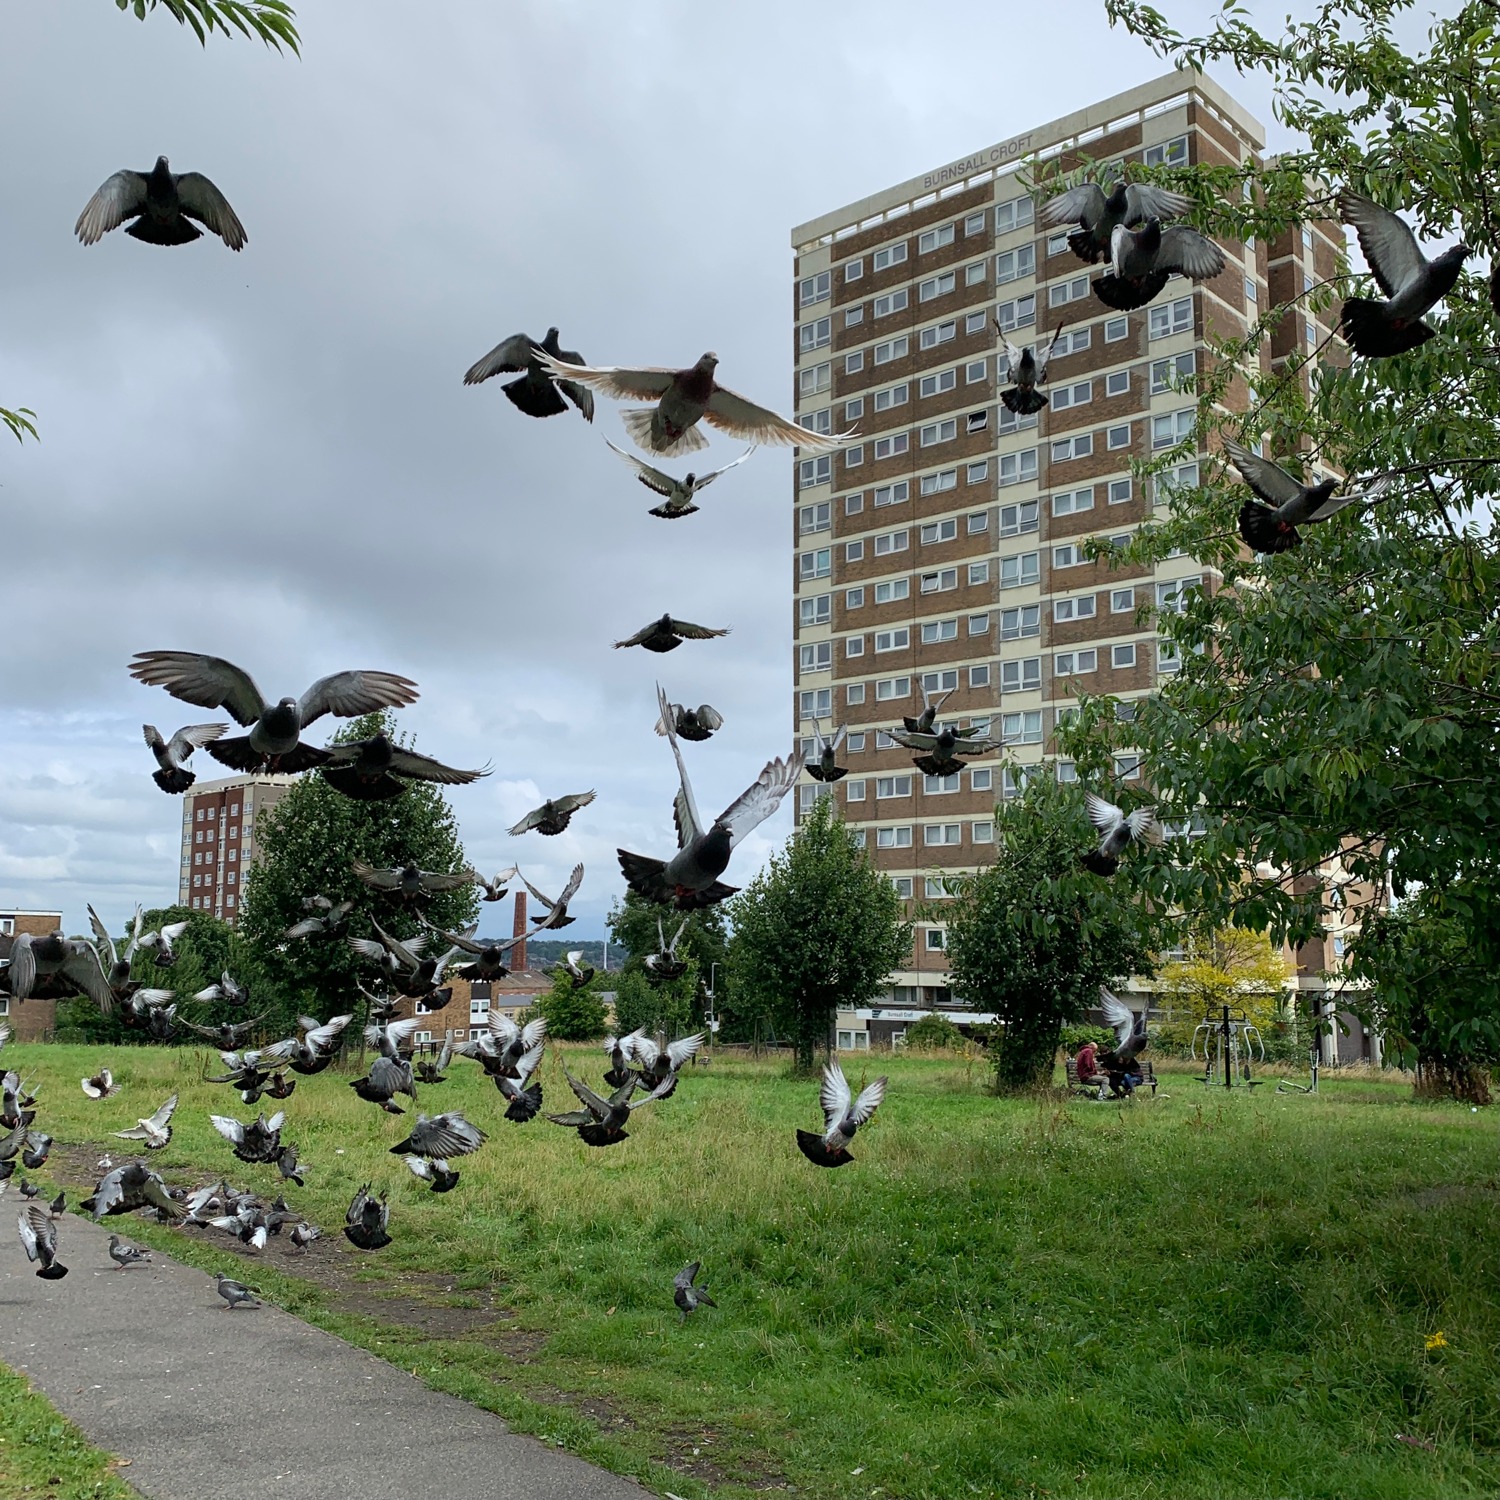 Hannah Platt's photograph, Armley Moor, Leeds - 20th June 2021, showing loads of pigeons zooming about in front of the towers